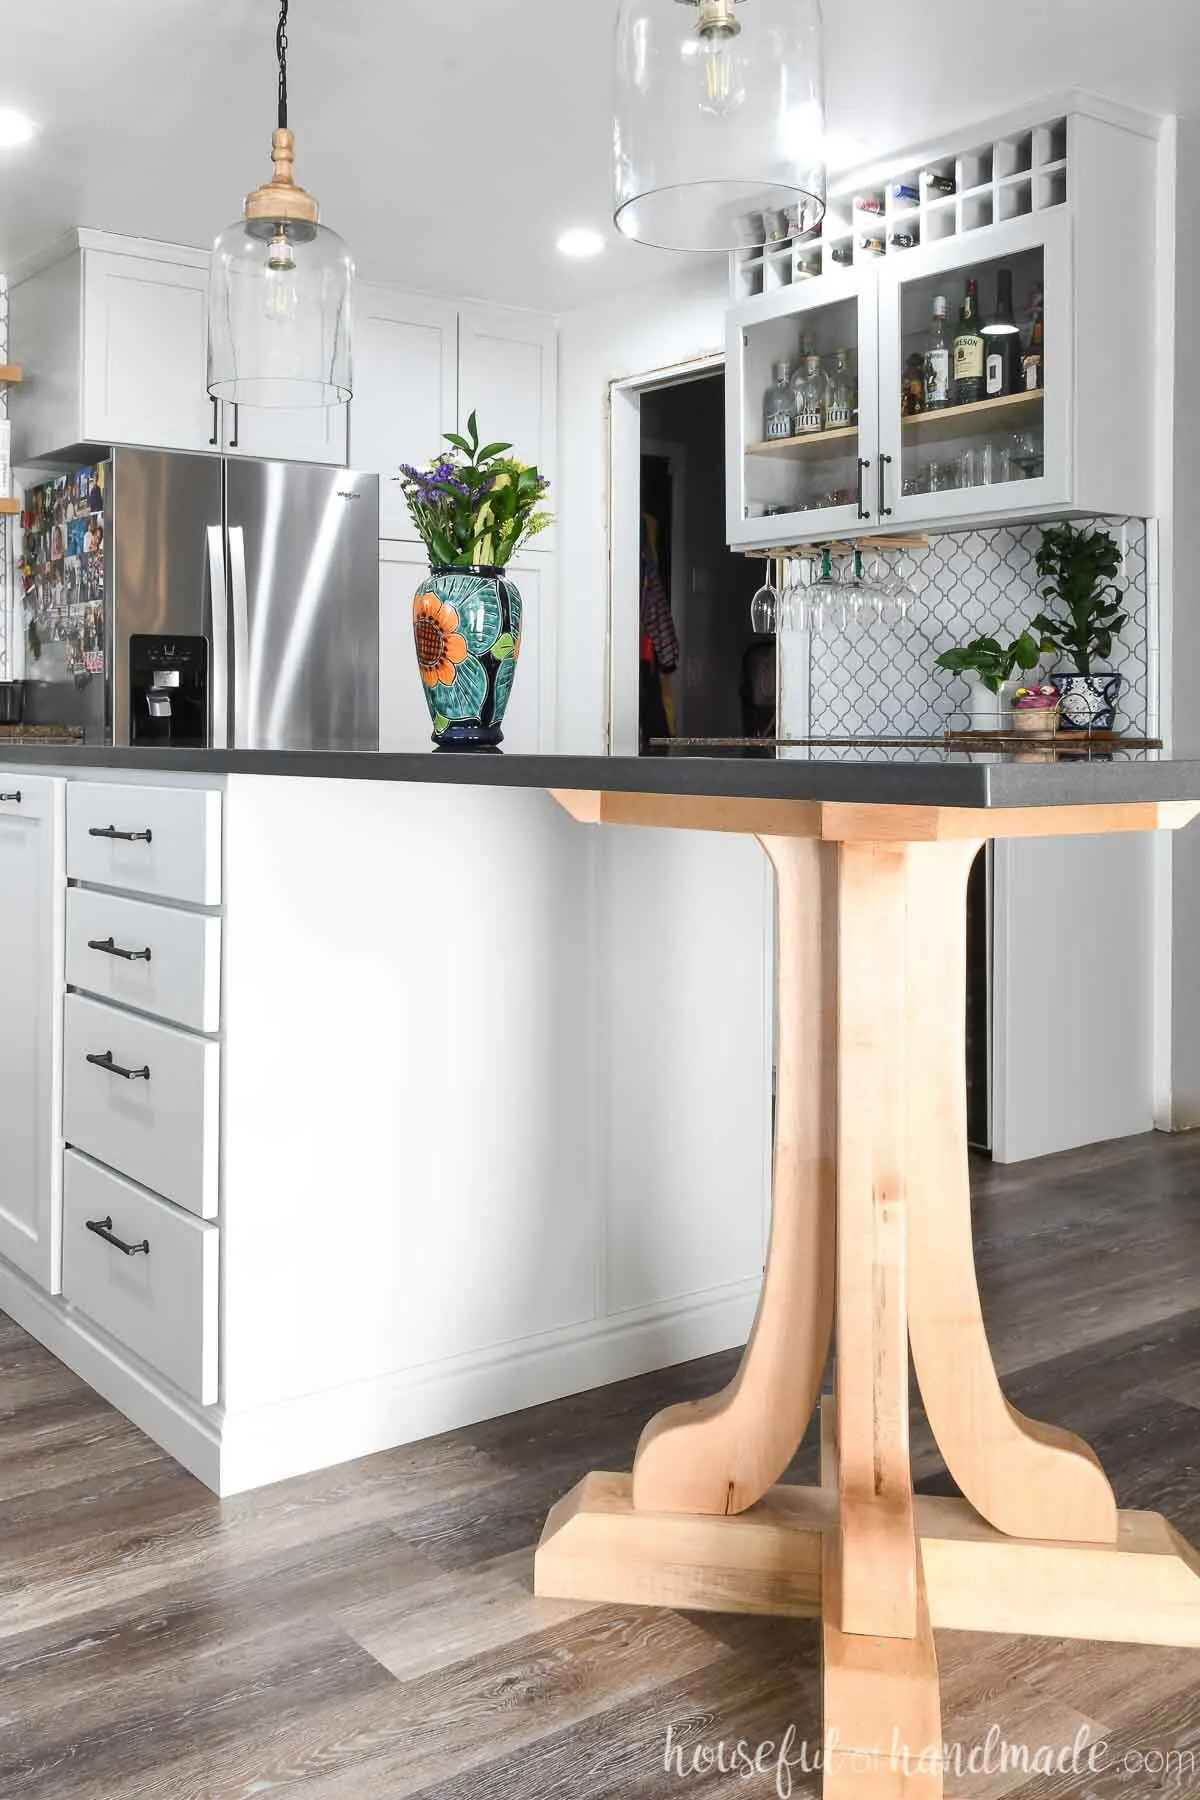 Black quartz topped kitchen island with a large maple pedestal on one end for bar height seating.